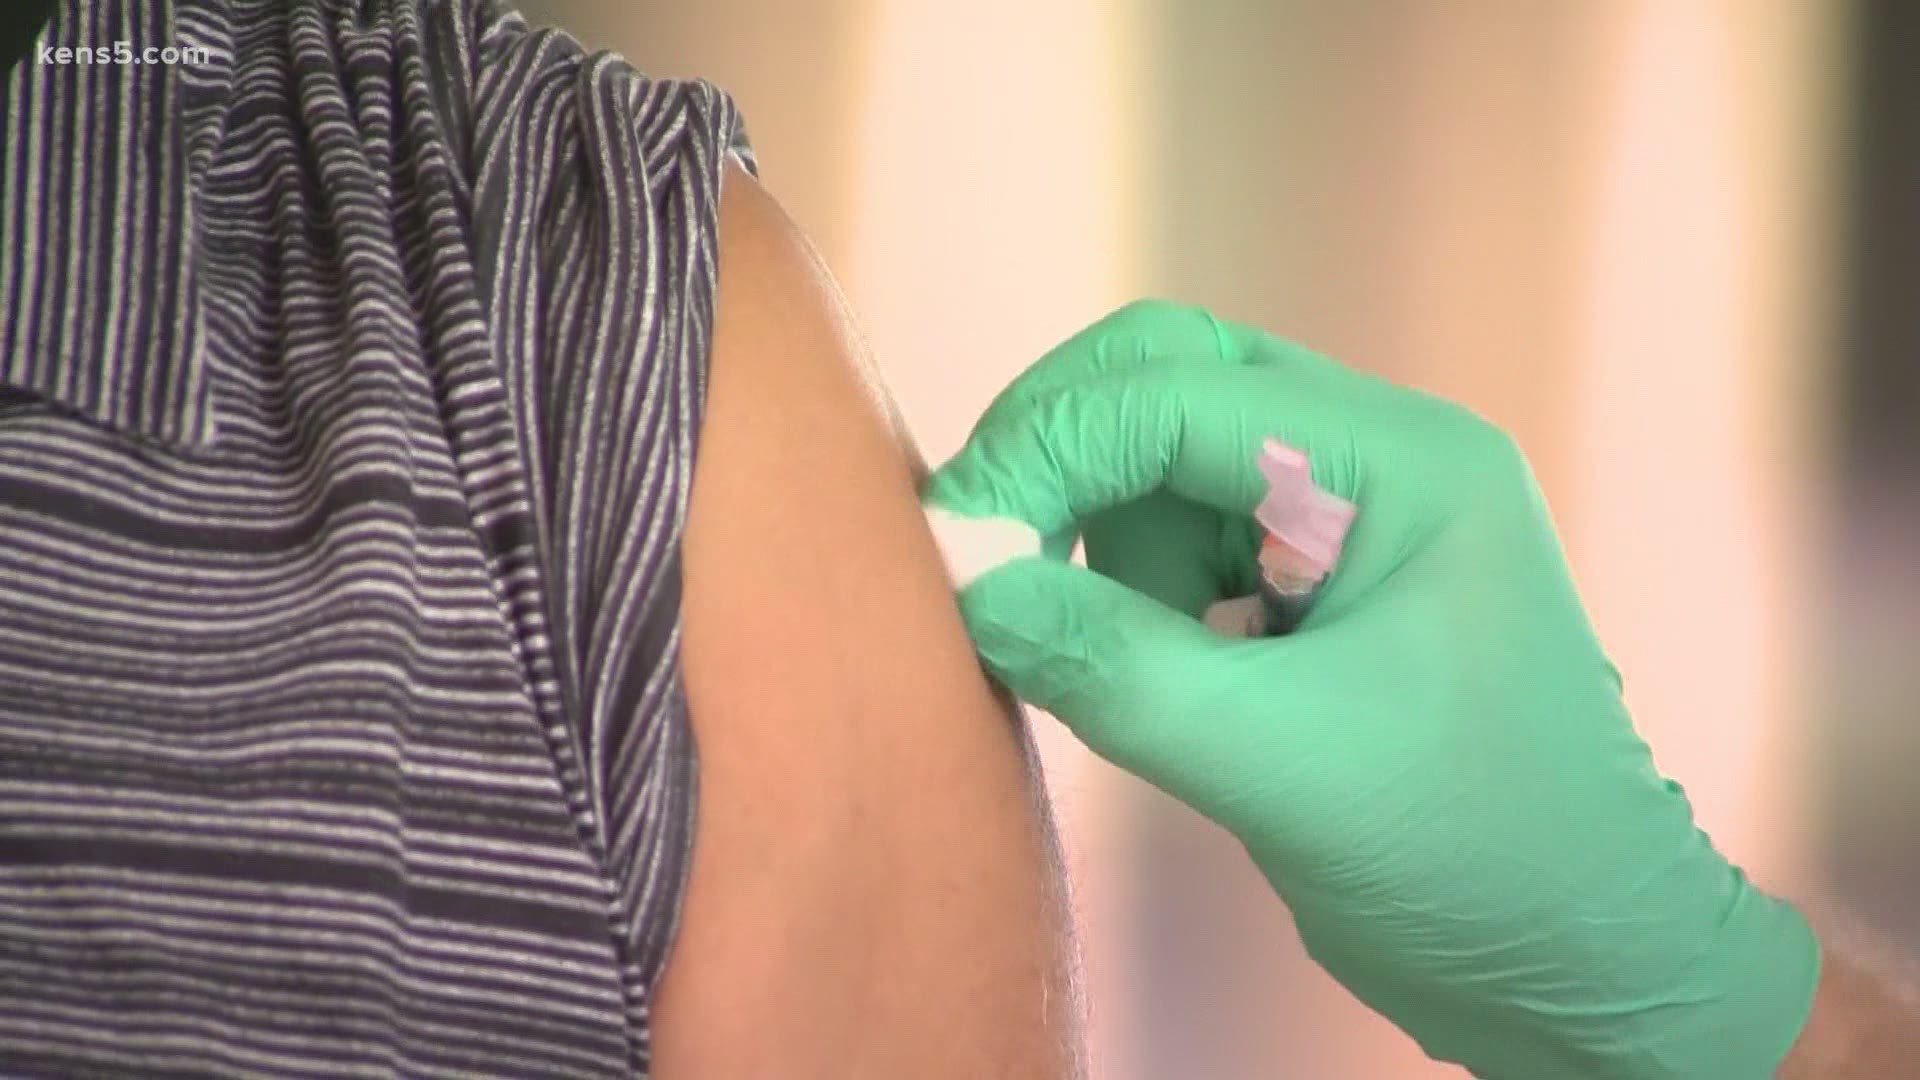 Experts share some advice for navigating routine vaccinations during the coronavirus pandemic.